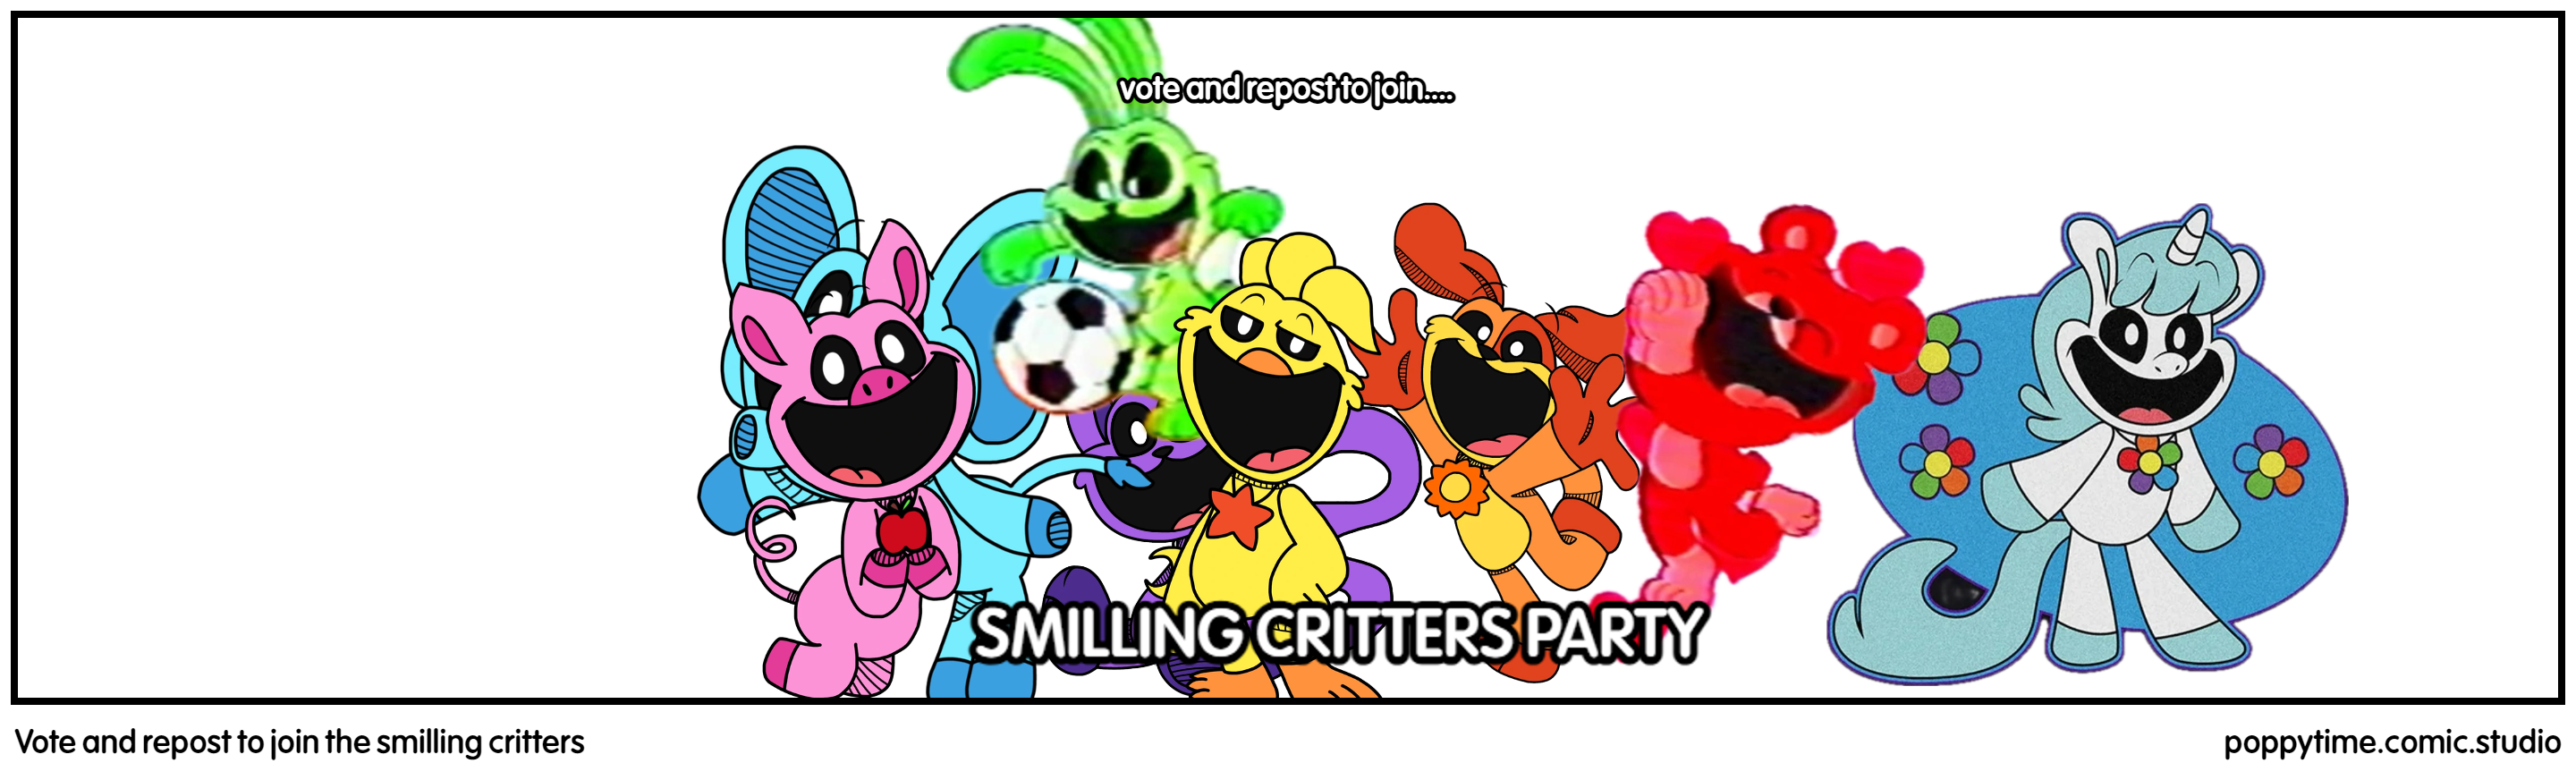 Vote and repost to join the smilling critters